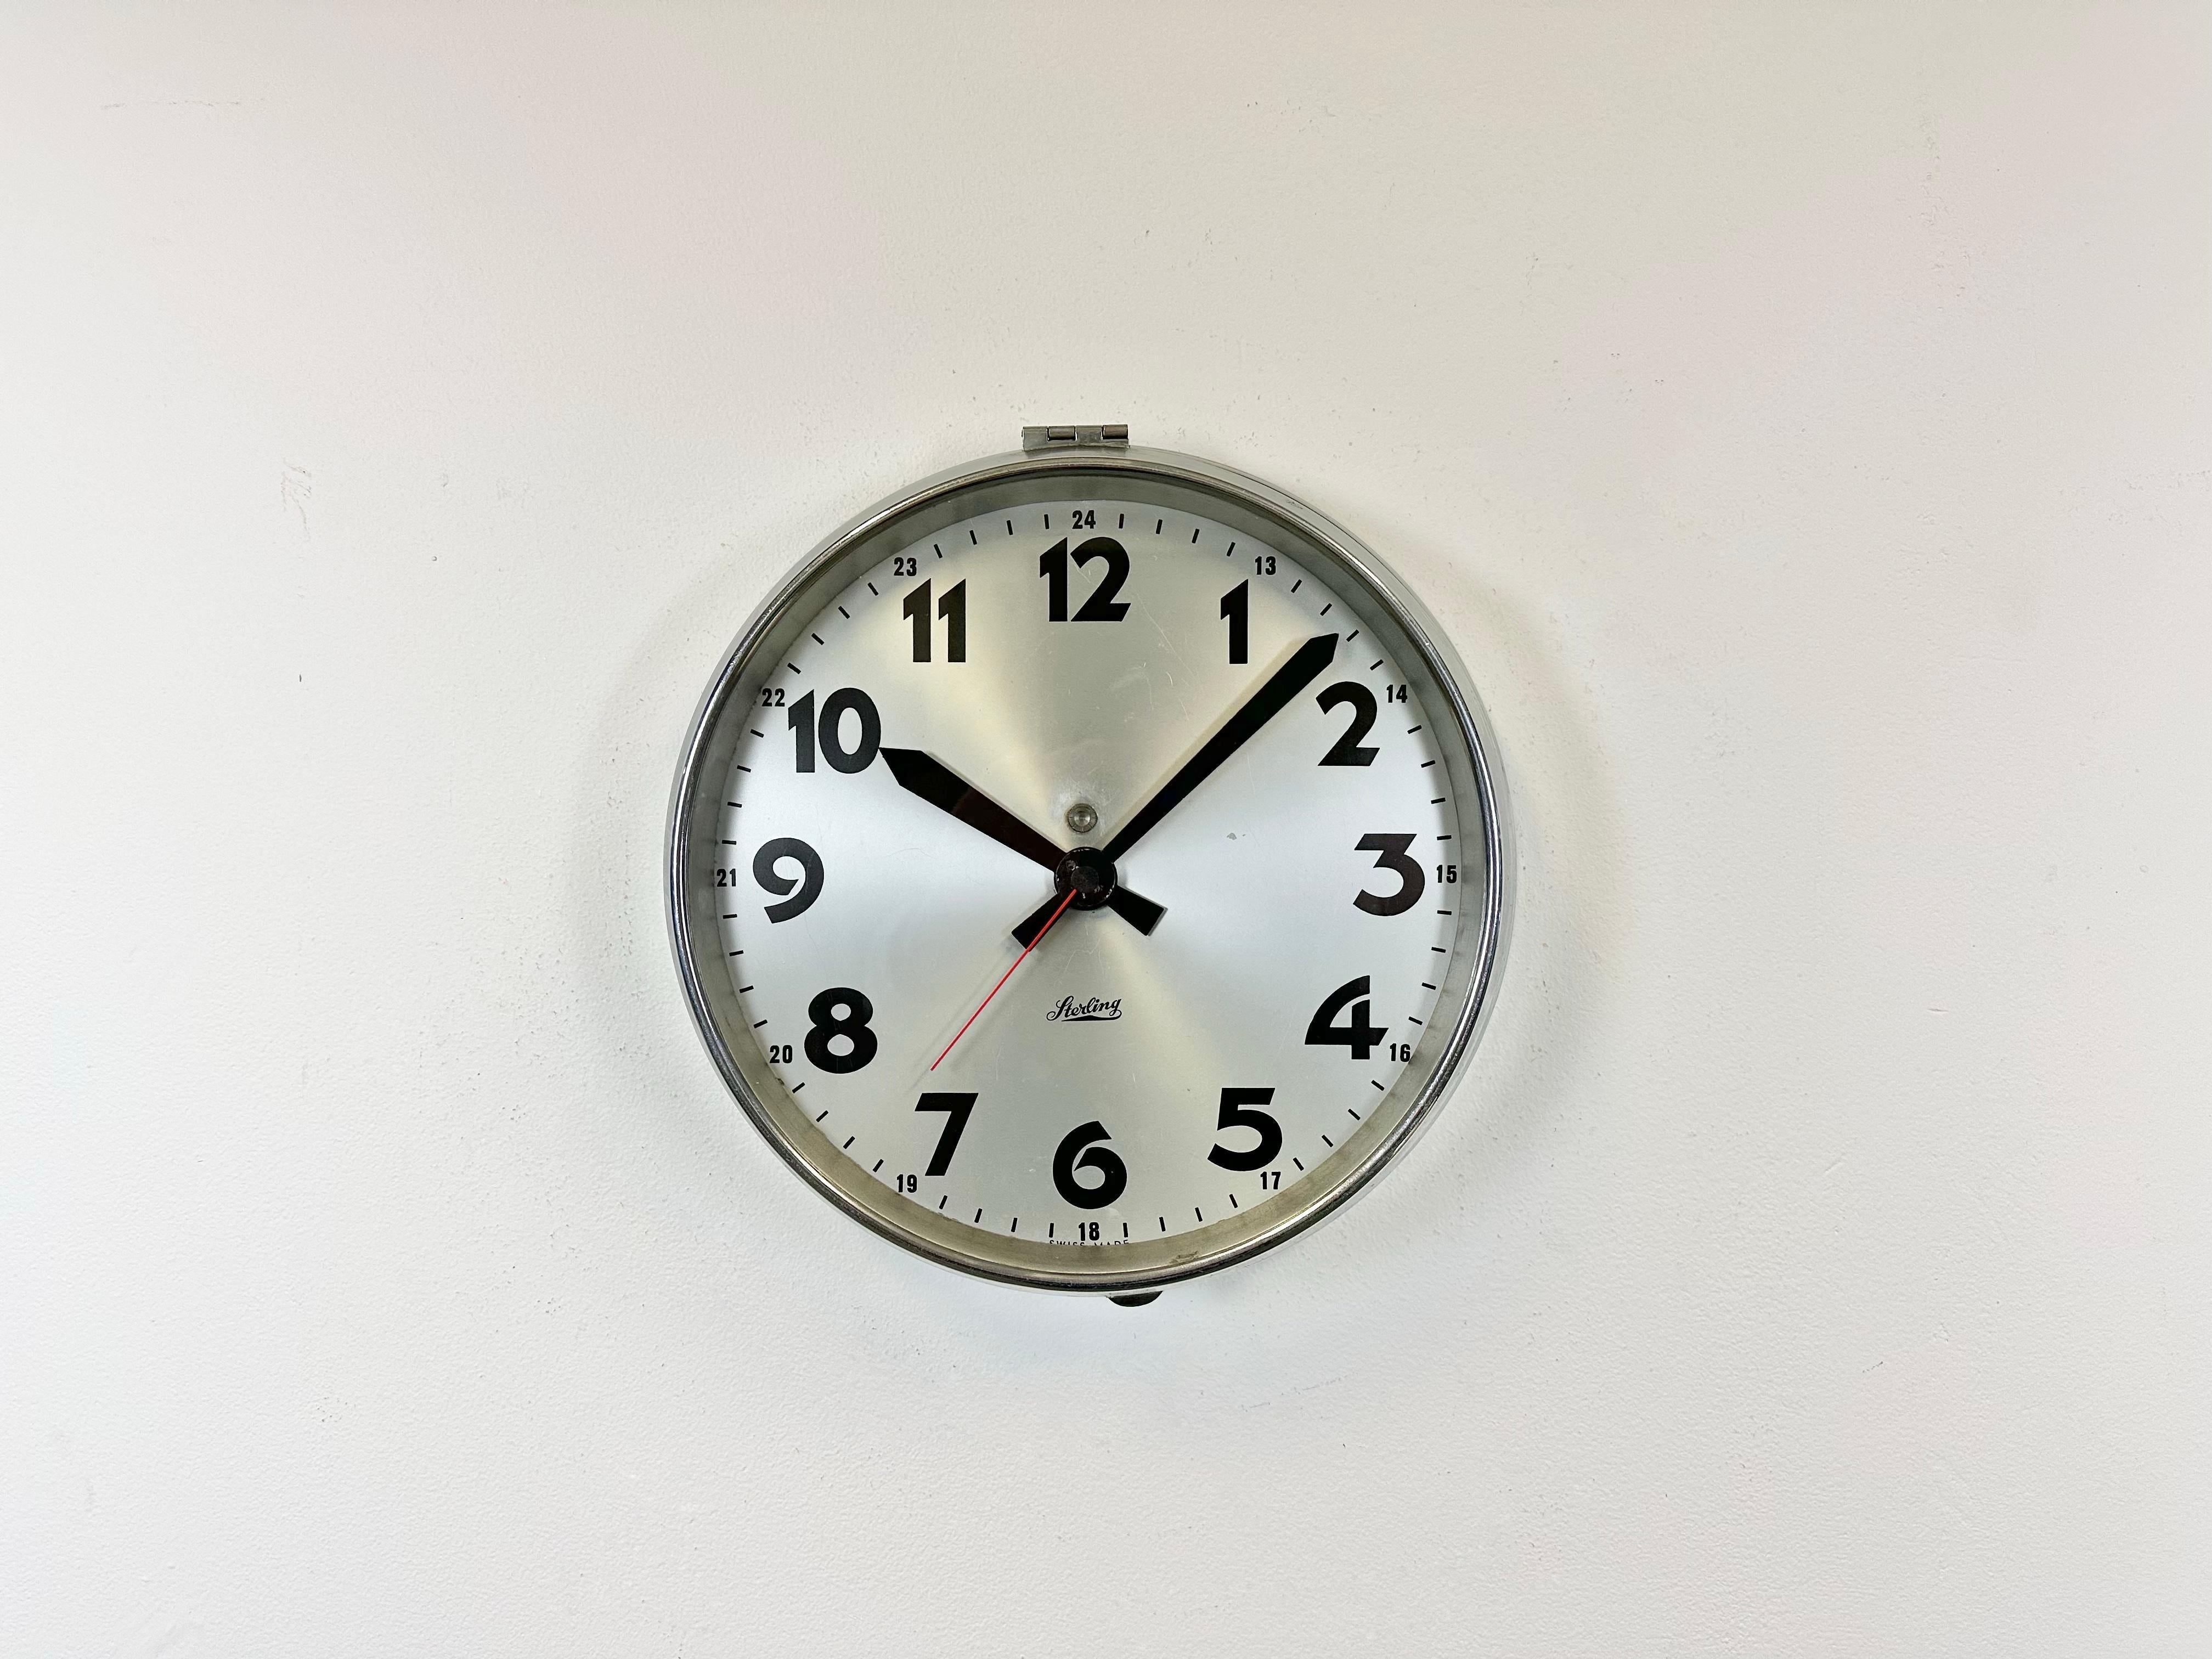 Vintage Industrial wall clock made by Sterling in Switzerland during the 1960s. It features a metal chrome plated frame, a silver metal dial, an aluminium hands and a clear glass cover. The piece has been converted into a battery-powered clockwork